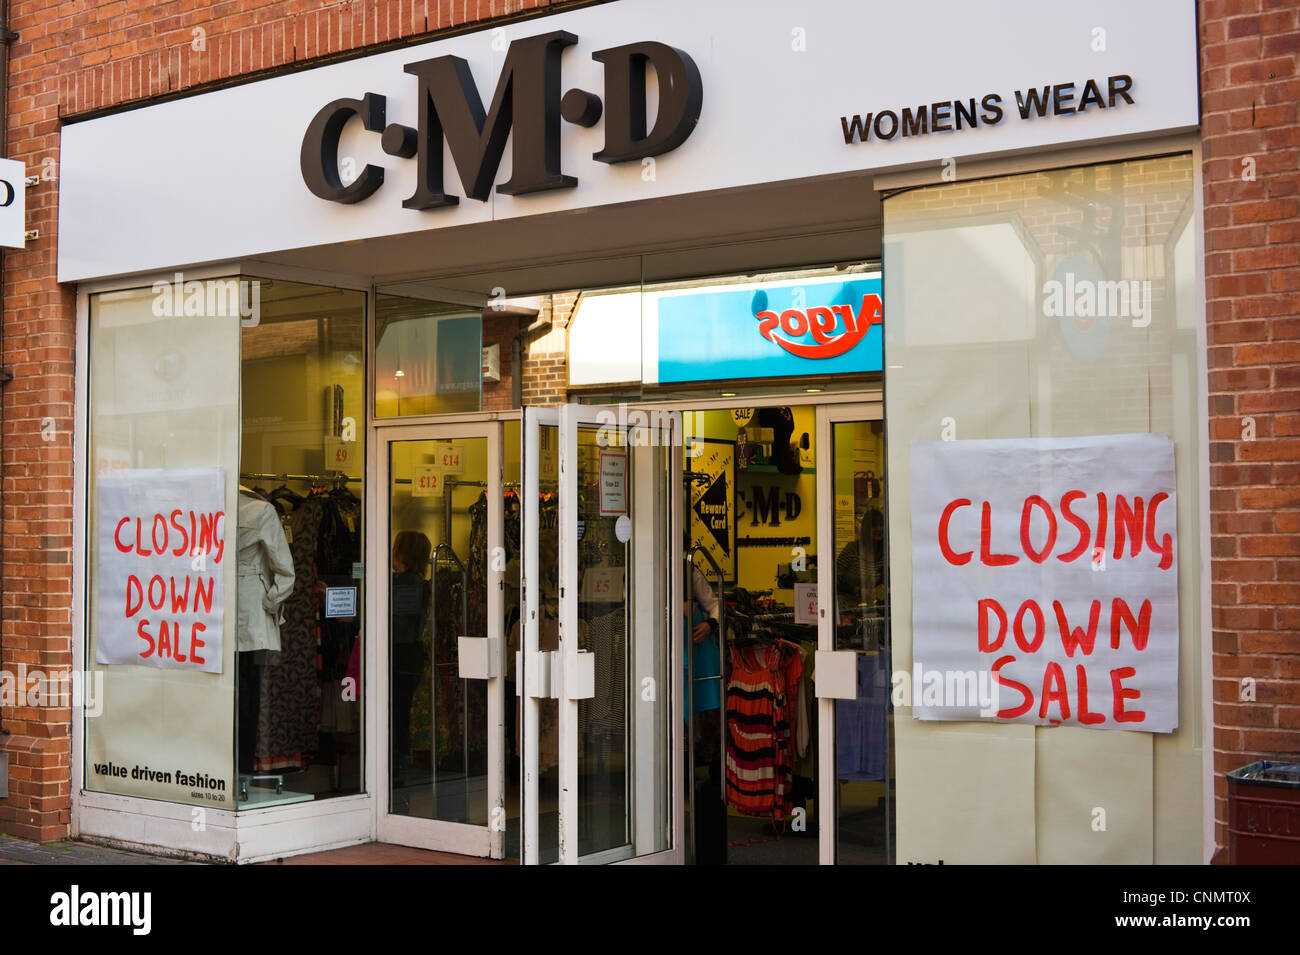 Closing down sale womens fashion shop in city centre of Hereford Herefordshire England UK Stock Photo